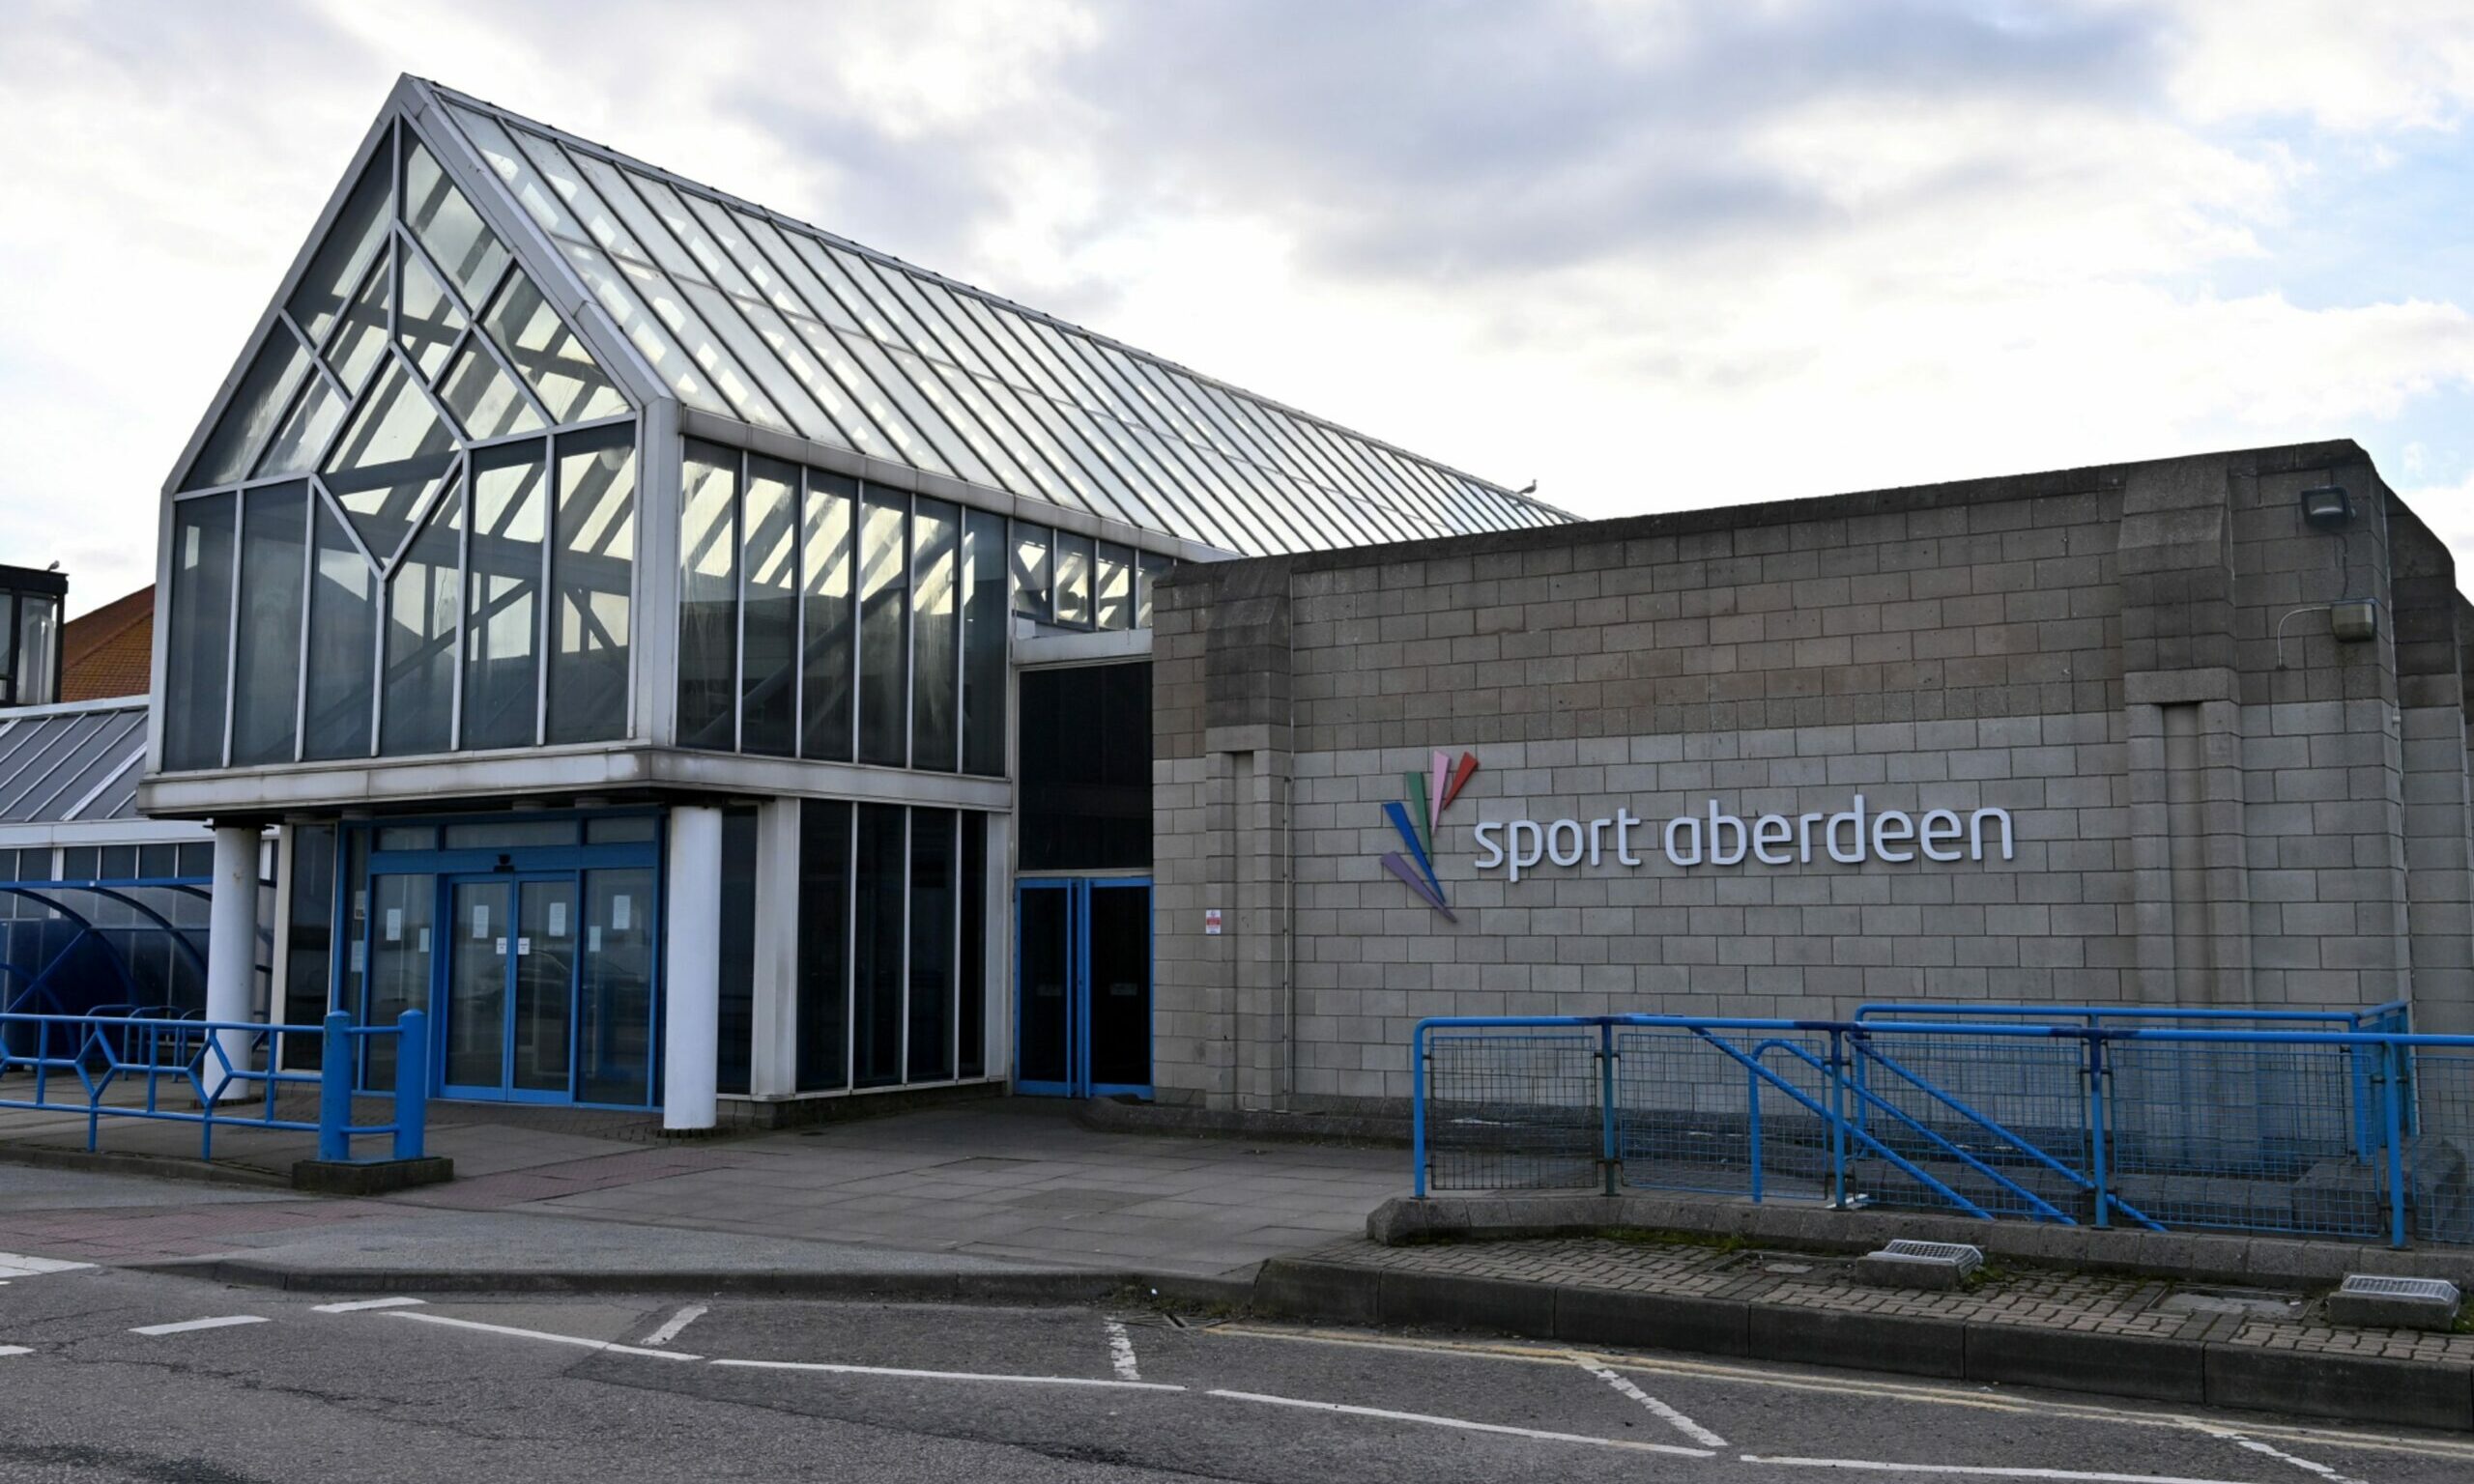 Calls to protect access to swimming pools in Aberdeen with £100,000 extra for Sport Aberdeen were refused - as council chiefs warn of financial "uncertainty" ahead.